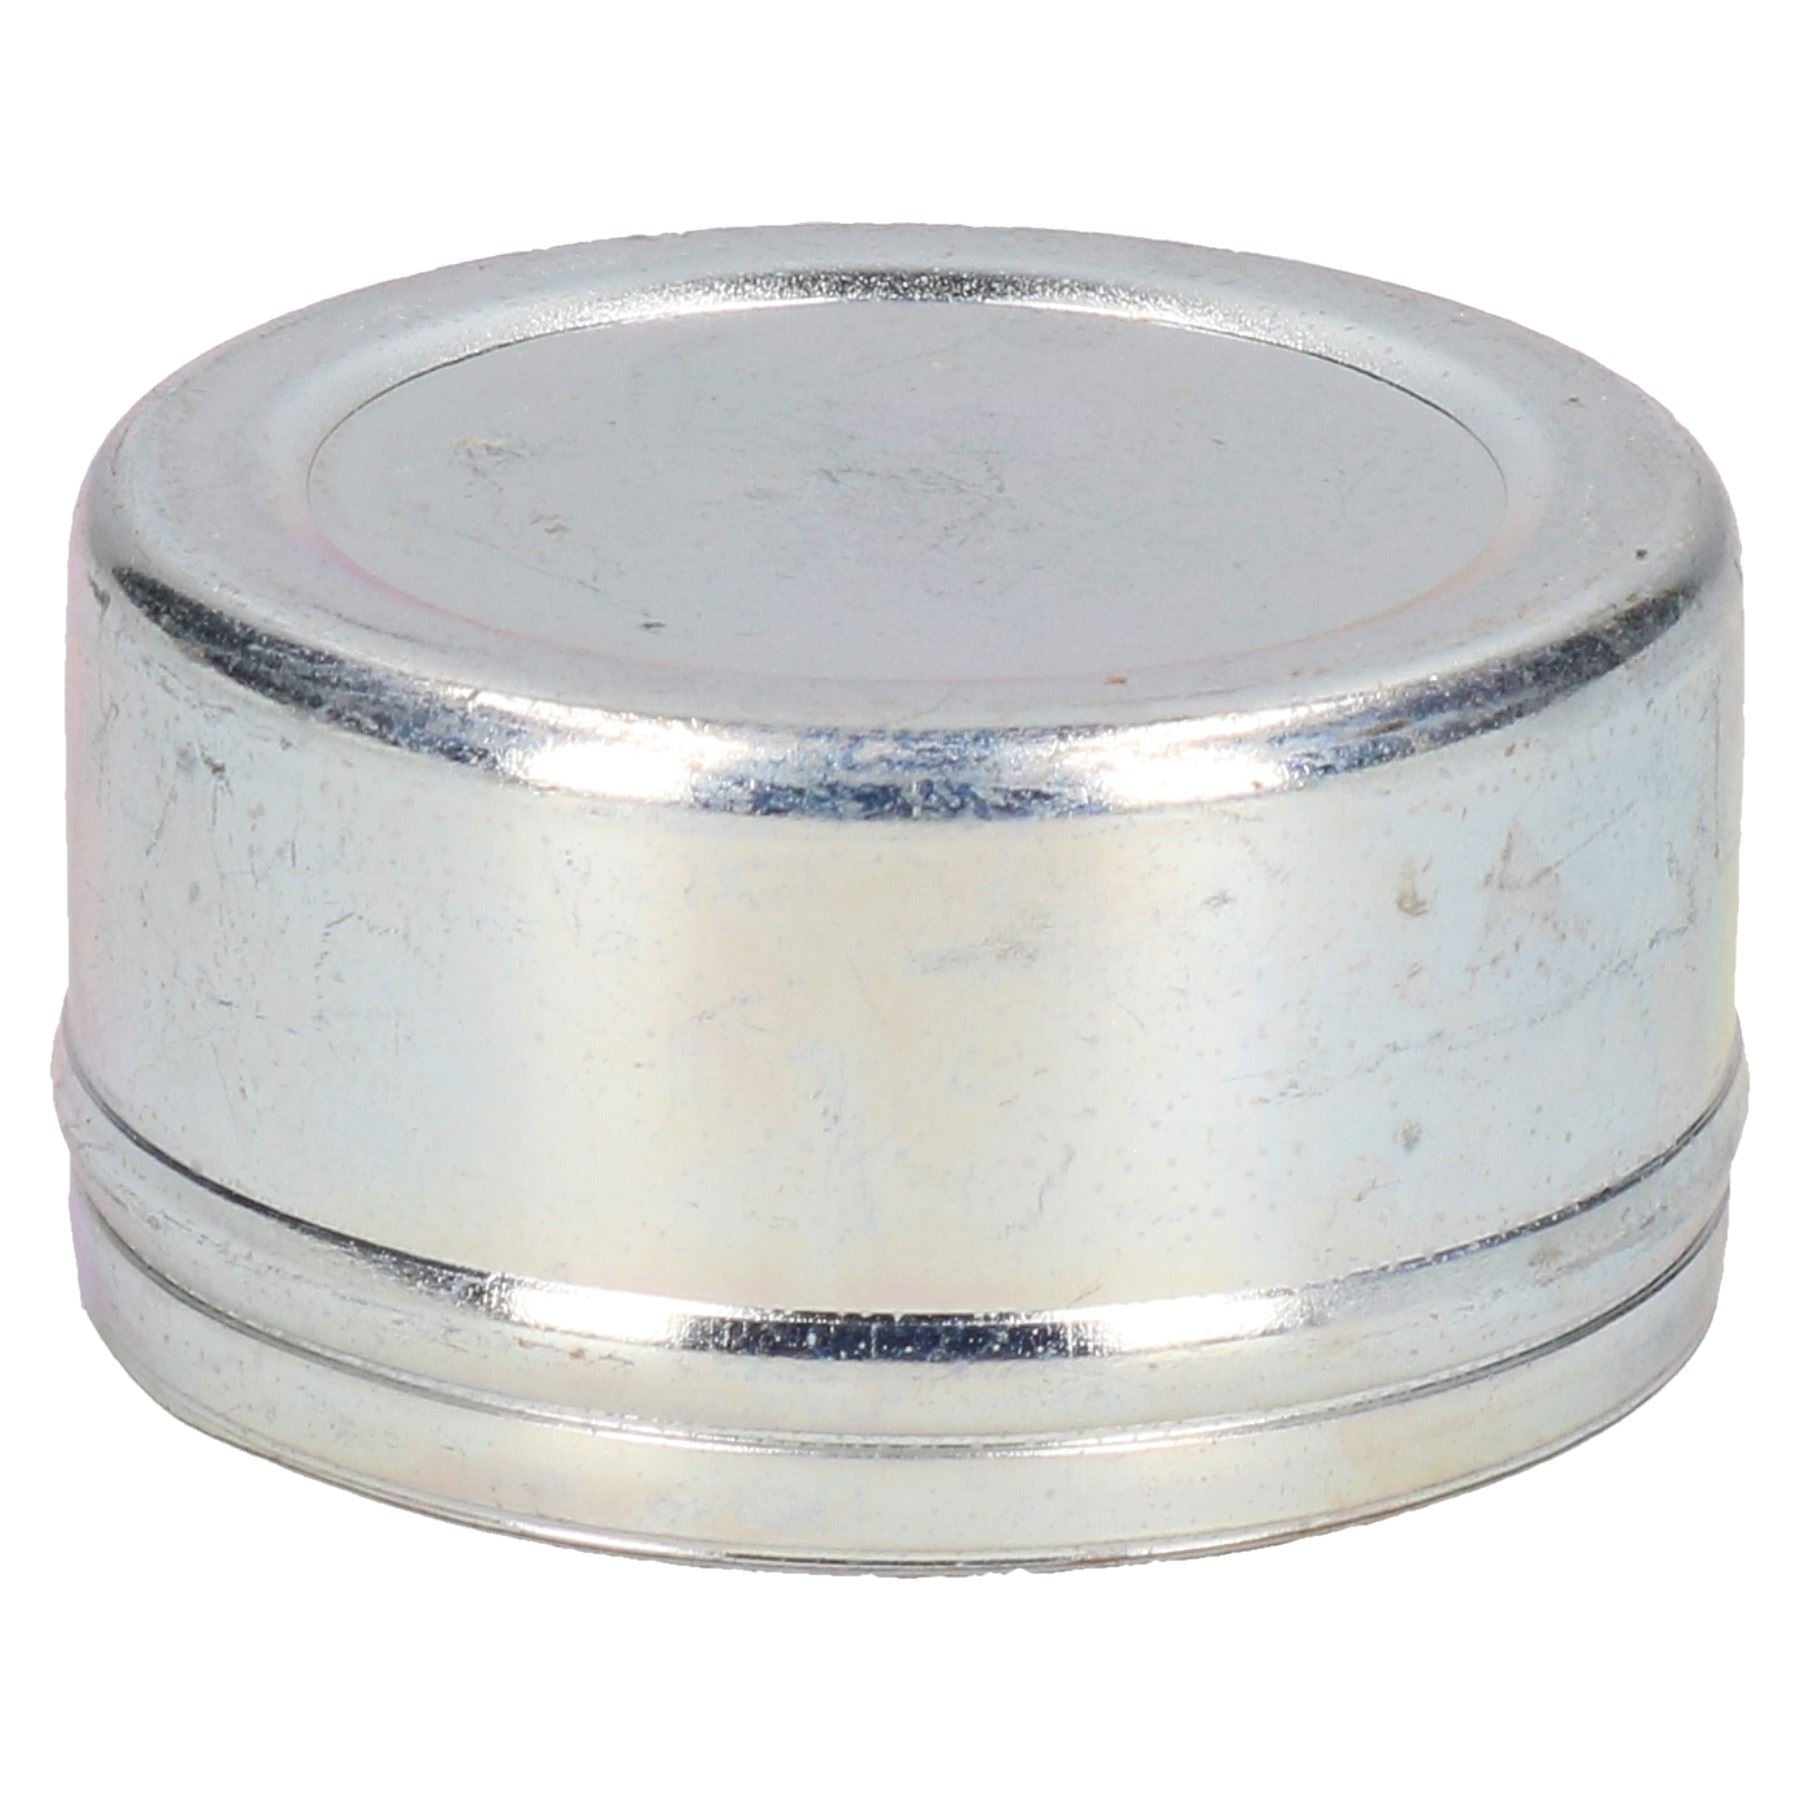 Replacement 55.5mm Dust Hub Cap Grease Cover for Alko Trailer Drums